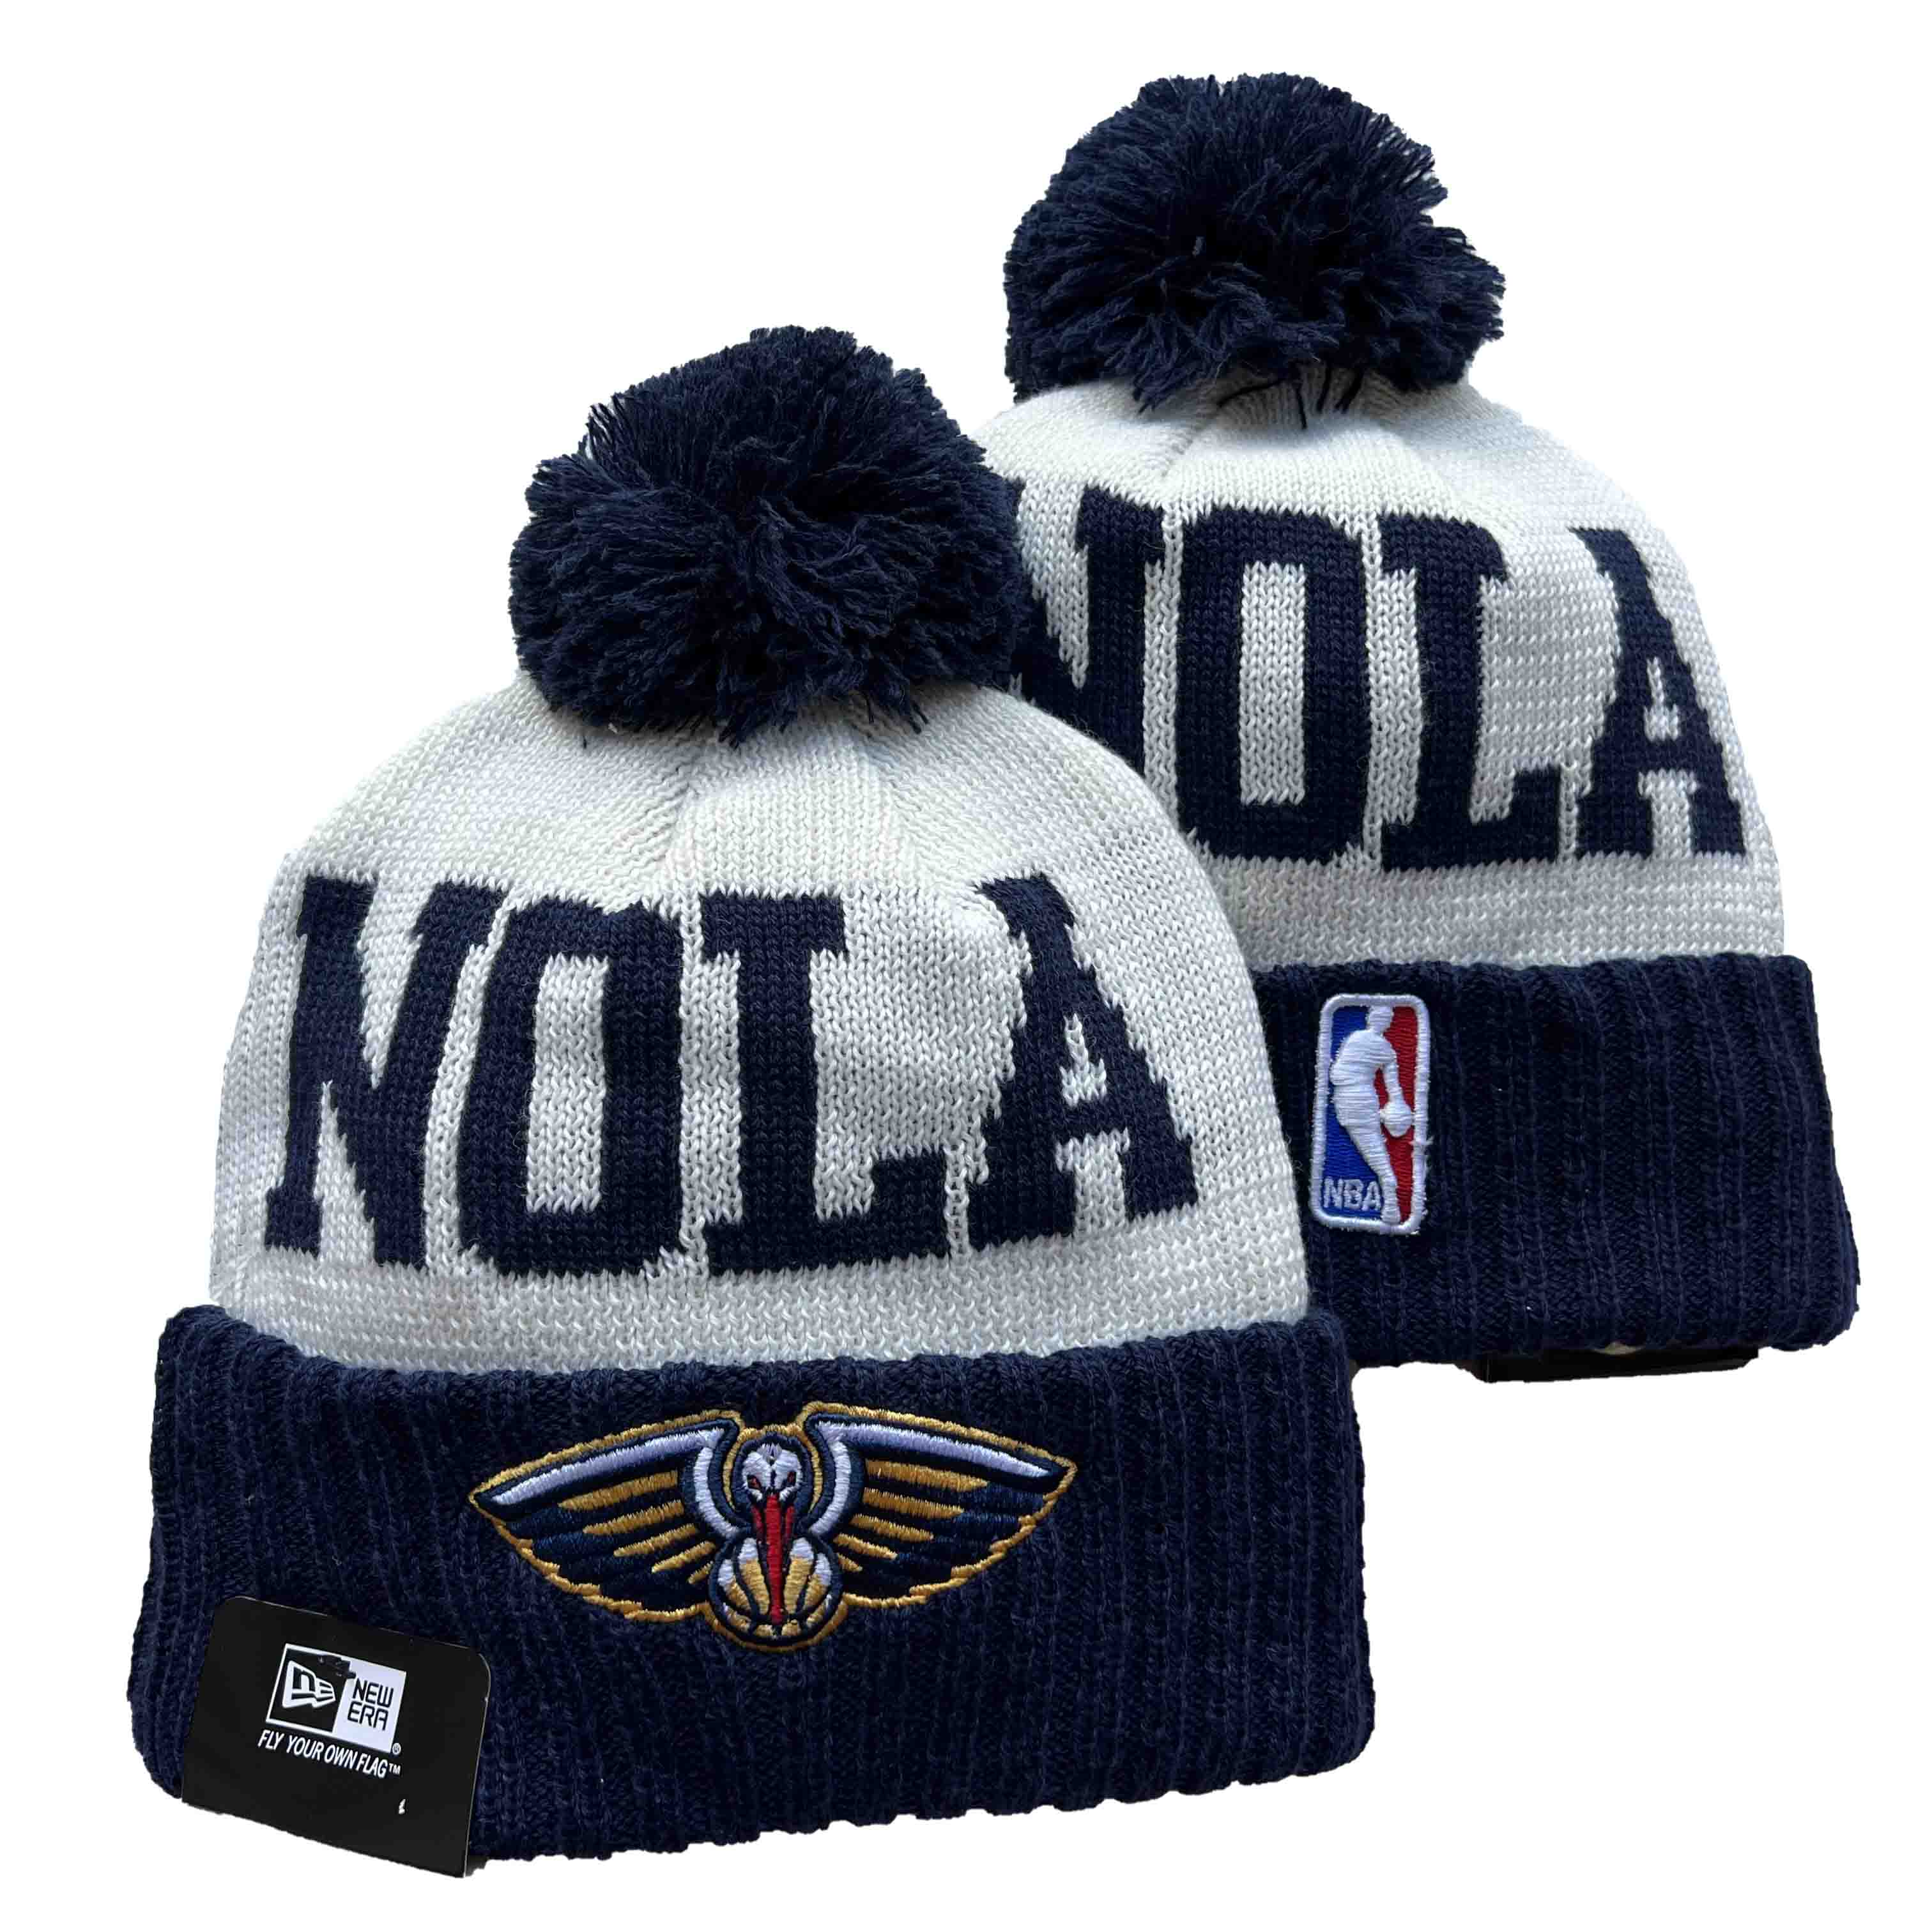 NBA New Orleans Pelicans Beanies Knit Hats-YD538